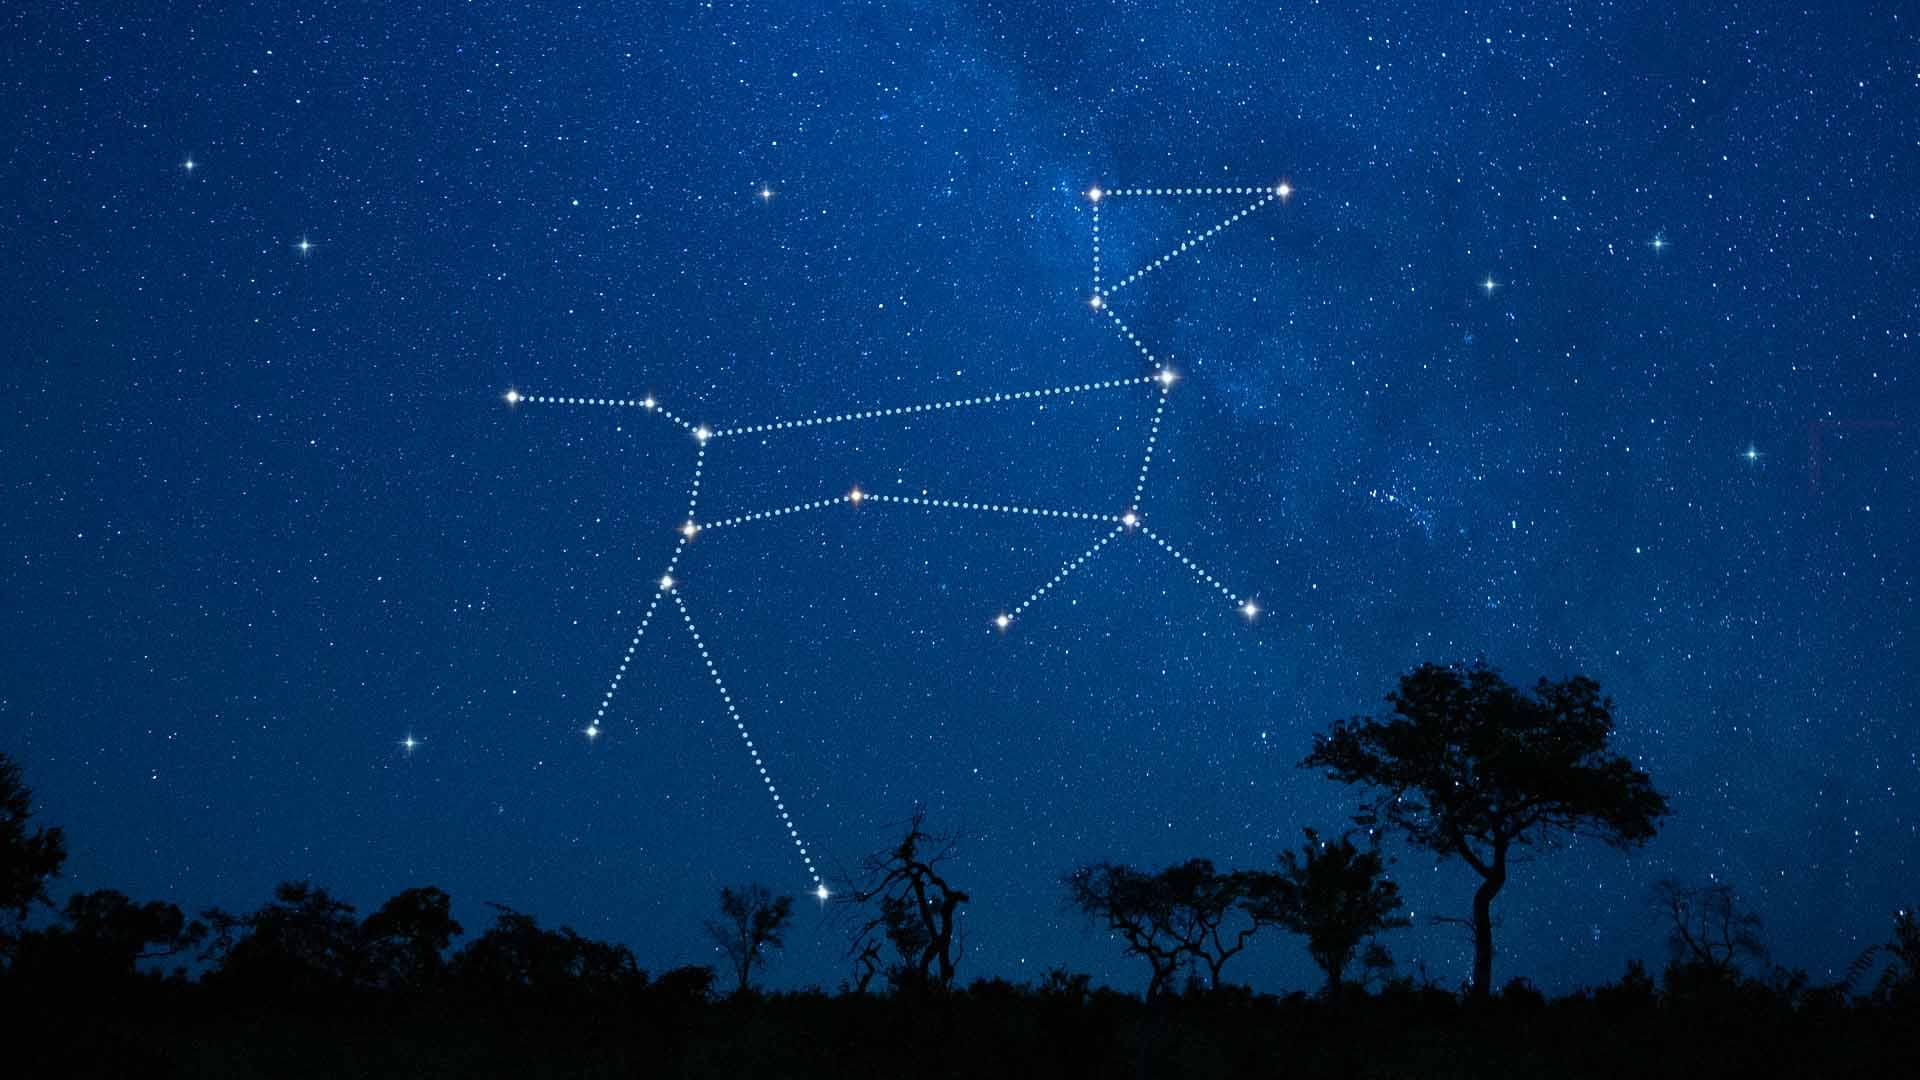 Canis Major – the Big Dog Constellation